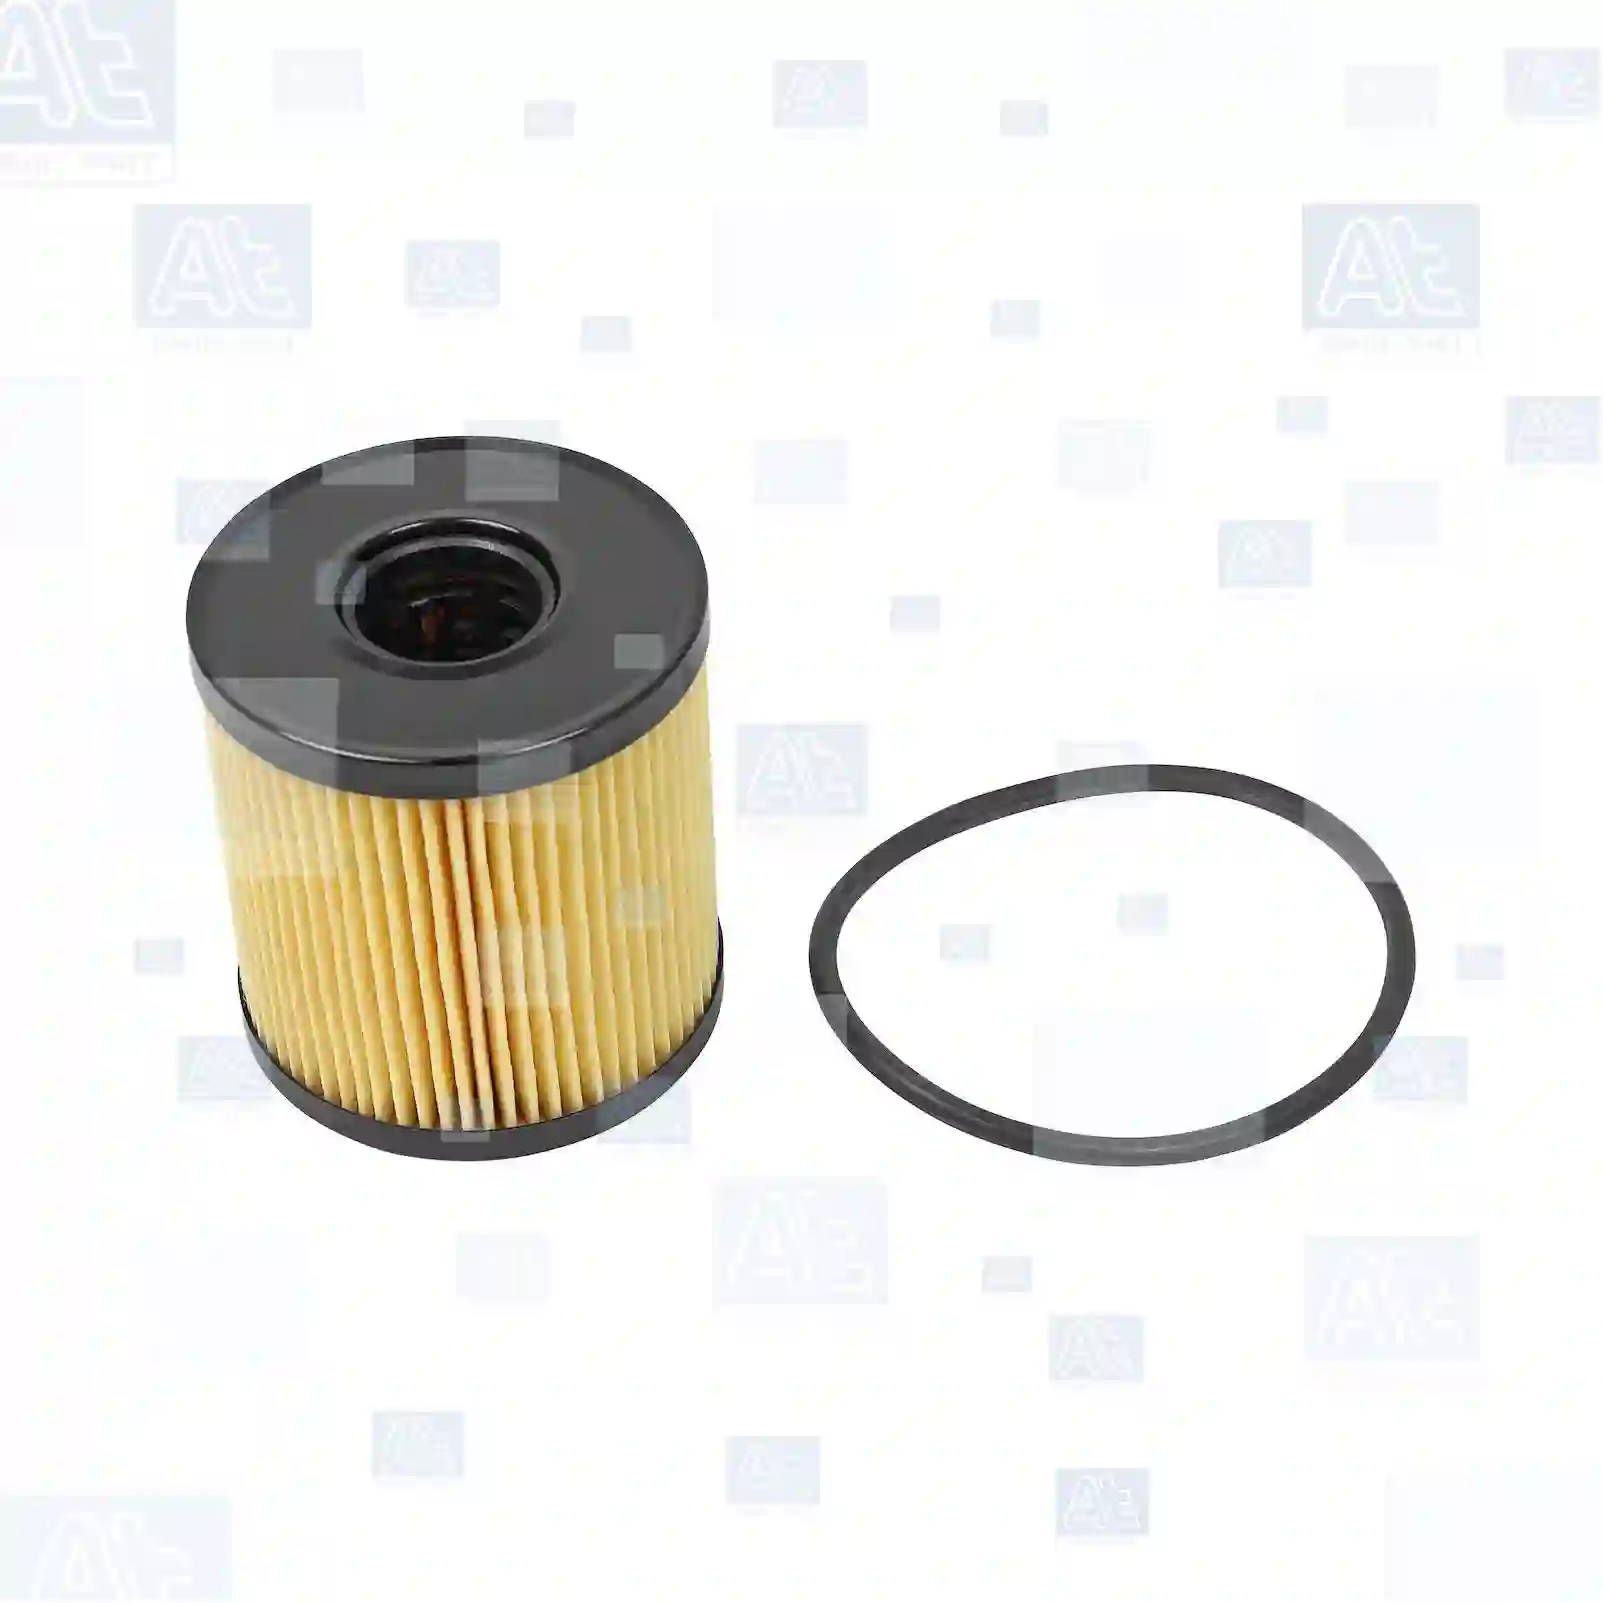 Oil filter insert, at no 77703153, oem no: 11427557012, 11427622446, 7622446, 01109A, 0119X4, 1109AH, 1109AJ, 1109CK, 1109CL, 1109L6, 1109X3, 1109X4, 1109Y9, 1109Z0, 1109Z1, 1109Z2, 9467645080, 9467645180, 9818914980, 982324, 1109AH, 9467521180, 9467558380, 9662282580, 1256739, 1303476, 1373069, 1427824, 1427846, 1717510, 1727561, 3M5Q-6744-AA, 6C1Q-6744-AA, 6C1Q-6744-BA, 9662282580, C2S43999, C2S52524, 9467521180, 9467558380, 9662282580, LR001247, LR001261, LR004459, LR028438, LR030778, 11427557012, 11427622446, MN982159, MN982324, MN982380, MN982419, TS200007, 01109A, 0119X4, 1109AH, 1109AJ, 1109CK, 1109CL, 1109L6, 1109X3, 1109X4, 1109Y9, 1109Z0, 1109Z1, 1109Z2, 9467645080, 9467645180, 9818914980, 982324, LR001247, LR004459, SU001-A0178, 30650798, 31372700, 31375029, ZG01732-0008 At Spare Part | Engine, Accelerator Pedal, Camshaft, Connecting Rod, Crankcase, Crankshaft, Cylinder Head, Engine Suspension Mountings, Exhaust Manifold, Exhaust Gas Recirculation, Filter Kits, Flywheel Housing, General Overhaul Kits, Engine, Intake Manifold, Oil Cleaner, Oil Cooler, Oil Filter, Oil Pump, Oil Sump, Piston & Liner, Sensor & Switch, Timing Case, Turbocharger, Cooling System, Belt Tensioner, Coolant Filter, Coolant Pipe, Corrosion Prevention Agent, Drive, Expansion Tank, Fan, Intercooler, Monitors & Gauges, Radiator, Thermostat, V-Belt / Timing belt, Water Pump, Fuel System, Electronical Injector Unit, Feed Pump, Fuel Filter, cpl., Fuel Gauge Sender,  Fuel Line, Fuel Pump, Fuel Tank, Injection Line Kit, Injection Pump, Exhaust System, Clutch & Pedal, Gearbox, Propeller Shaft, Axles, Brake System, Hubs & Wheels, Suspension, Leaf Spring, Universal Parts / Accessories, Steering, Electrical System, Cabin Oil filter insert, at no 77703153, oem no: 11427557012, 11427622446, 7622446, 01109A, 0119X4, 1109AH, 1109AJ, 1109CK, 1109CL, 1109L6, 1109X3, 1109X4, 1109Y9, 1109Z0, 1109Z1, 1109Z2, 9467645080, 9467645180, 9818914980, 982324, 1109AH, 9467521180, 9467558380, 9662282580, 1256739, 1303476, 1373069, 1427824, 1427846, 1717510, 1727561, 3M5Q-6744-AA, 6C1Q-6744-AA, 6C1Q-6744-BA, 9662282580, C2S43999, C2S52524, 9467521180, 9467558380, 9662282580, LR001247, LR001261, LR004459, LR028438, LR030778, 11427557012, 11427622446, MN982159, MN982324, MN982380, MN982419, TS200007, 01109A, 0119X4, 1109AH, 1109AJ, 1109CK, 1109CL, 1109L6, 1109X3, 1109X4, 1109Y9, 1109Z0, 1109Z1, 1109Z2, 9467645080, 9467645180, 9818914980, 982324, LR001247, LR004459, SU001-A0178, 30650798, 31372700, 31375029, ZG01732-0008 At Spare Part | Engine, Accelerator Pedal, Camshaft, Connecting Rod, Crankcase, Crankshaft, Cylinder Head, Engine Suspension Mountings, Exhaust Manifold, Exhaust Gas Recirculation, Filter Kits, Flywheel Housing, General Overhaul Kits, Engine, Intake Manifold, Oil Cleaner, Oil Cooler, Oil Filter, Oil Pump, Oil Sump, Piston & Liner, Sensor & Switch, Timing Case, Turbocharger, Cooling System, Belt Tensioner, Coolant Filter, Coolant Pipe, Corrosion Prevention Agent, Drive, Expansion Tank, Fan, Intercooler, Monitors & Gauges, Radiator, Thermostat, V-Belt / Timing belt, Water Pump, Fuel System, Electronical Injector Unit, Feed Pump, Fuel Filter, cpl., Fuel Gauge Sender,  Fuel Line, Fuel Pump, Fuel Tank, Injection Line Kit, Injection Pump, Exhaust System, Clutch & Pedal, Gearbox, Propeller Shaft, Axles, Brake System, Hubs & Wheels, Suspension, Leaf Spring, Universal Parts / Accessories, Steering, Electrical System, Cabin